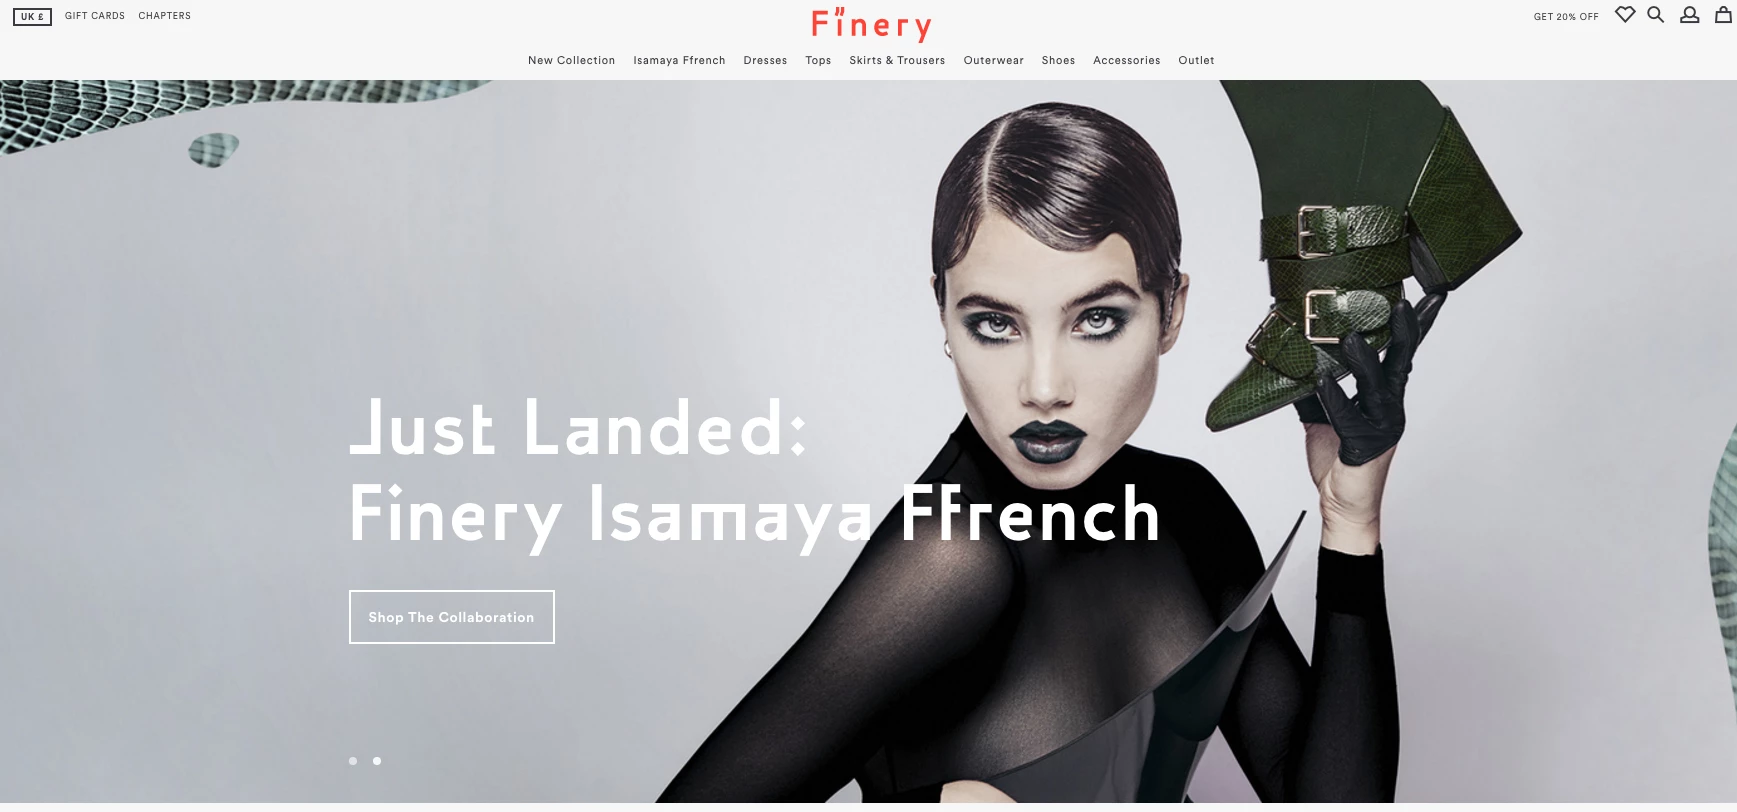 London-based womenswear brand Finery has launched a new partnership with Klarna.